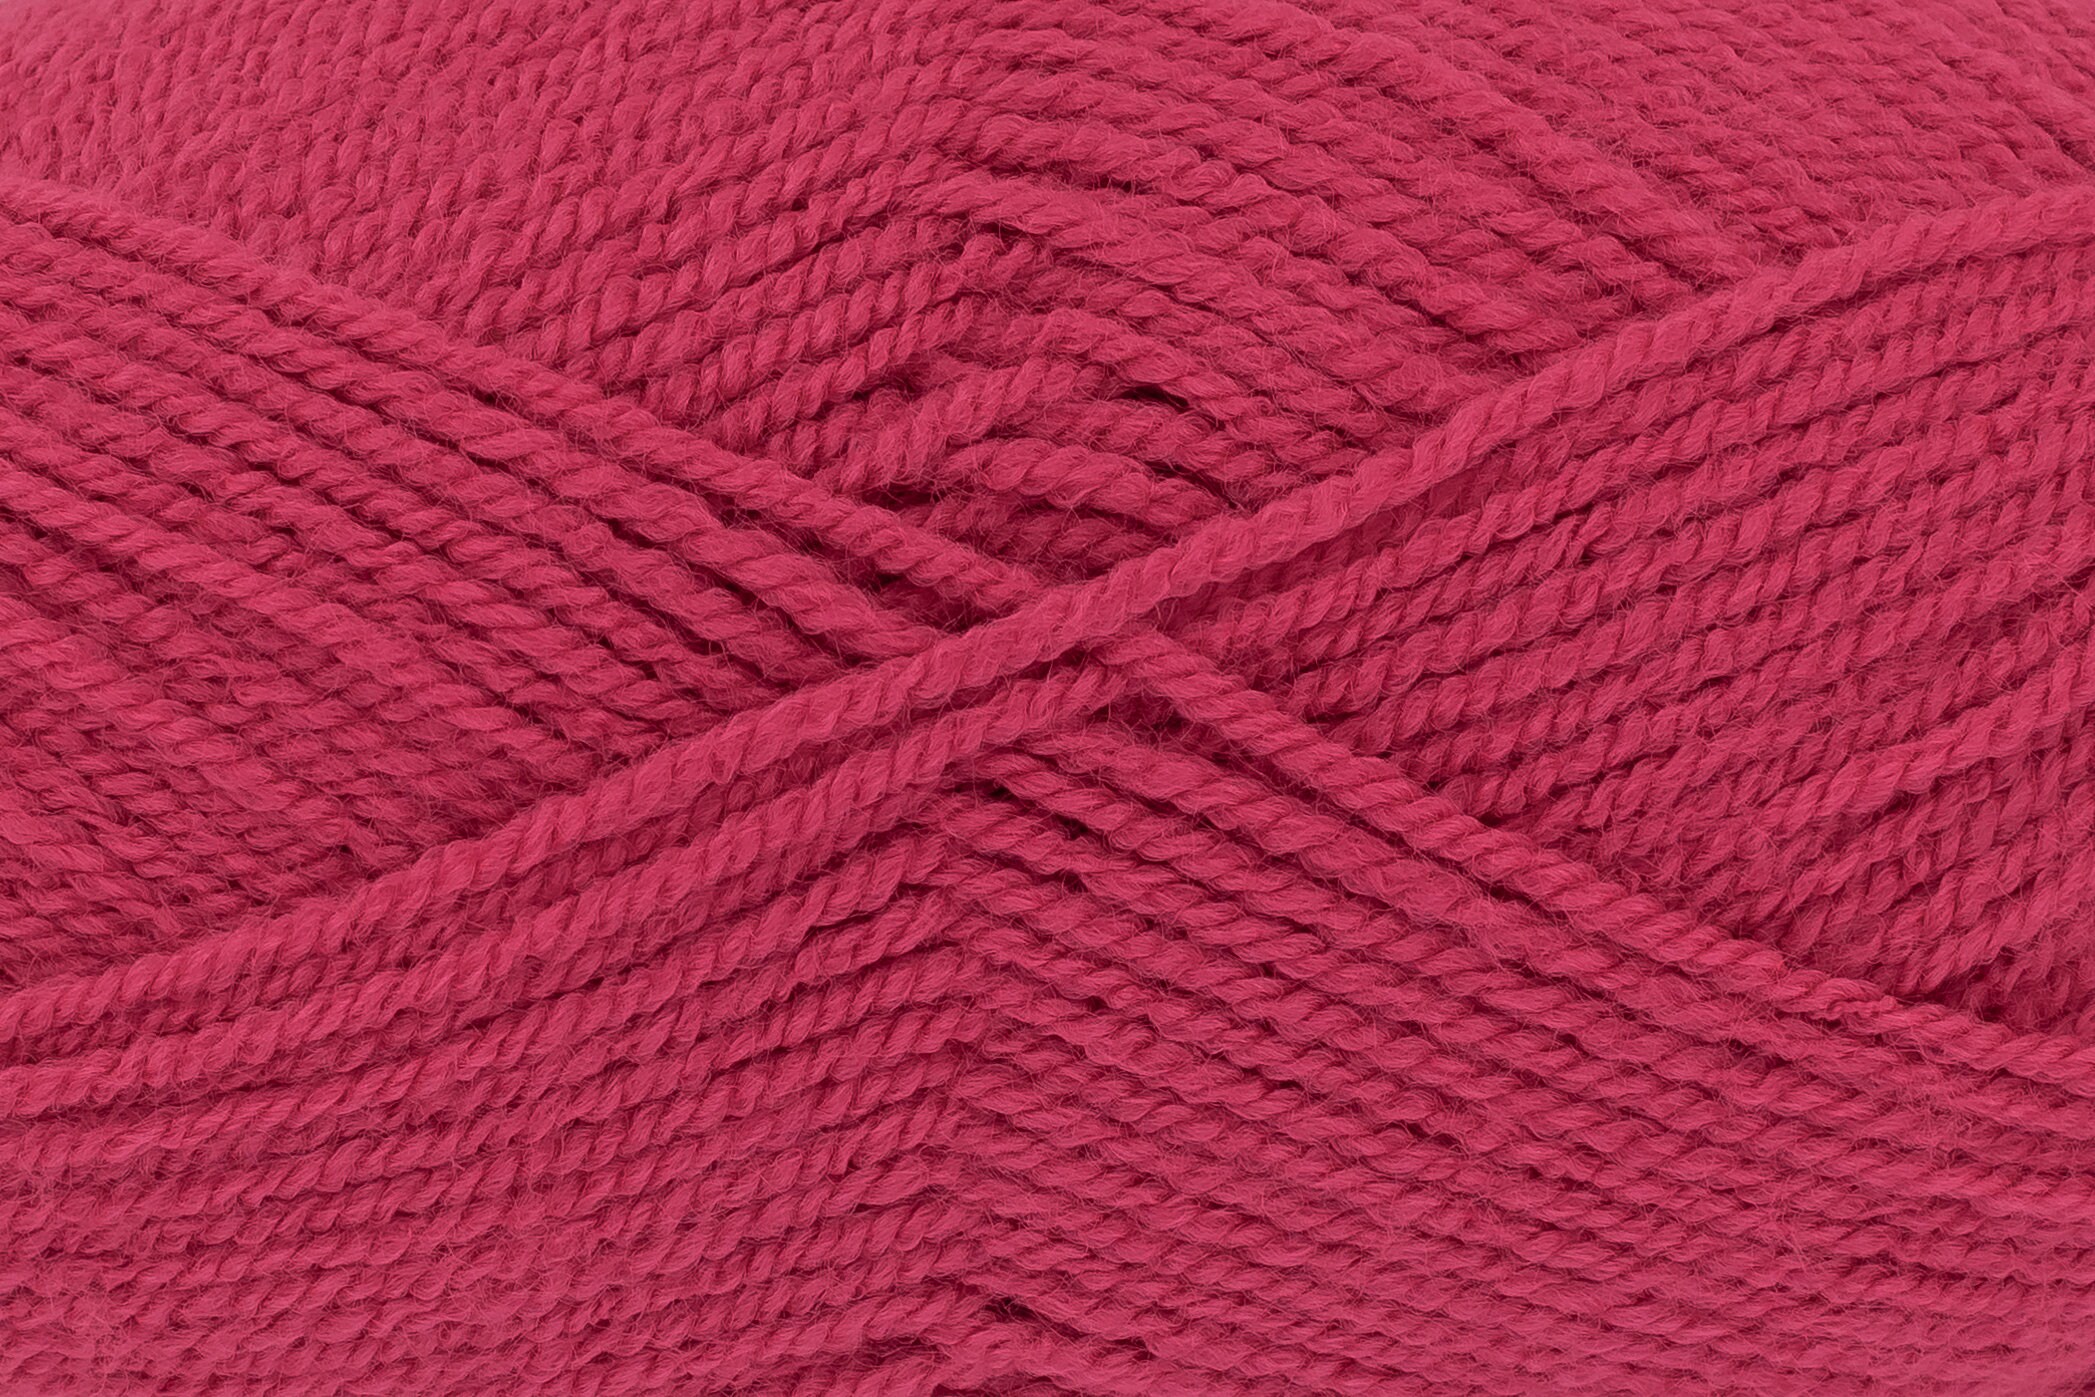 Big Twist Value Yarn Hot Pink Acrylic Worsted Weight Yarn Crochet and Knit  Craft Supplies 